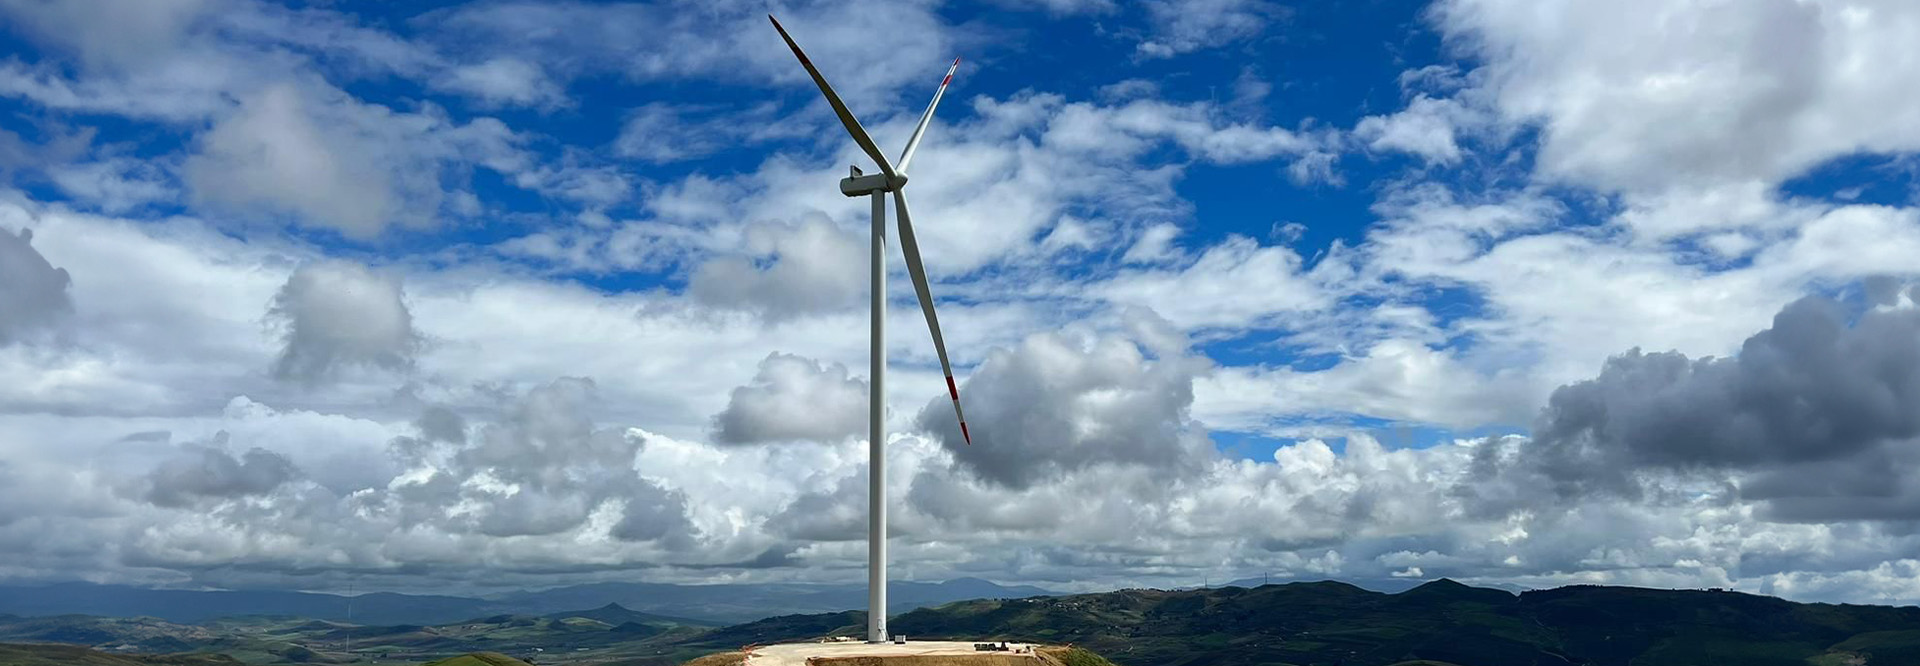 A wind turbine. Mountains and clouds in the background (photo)